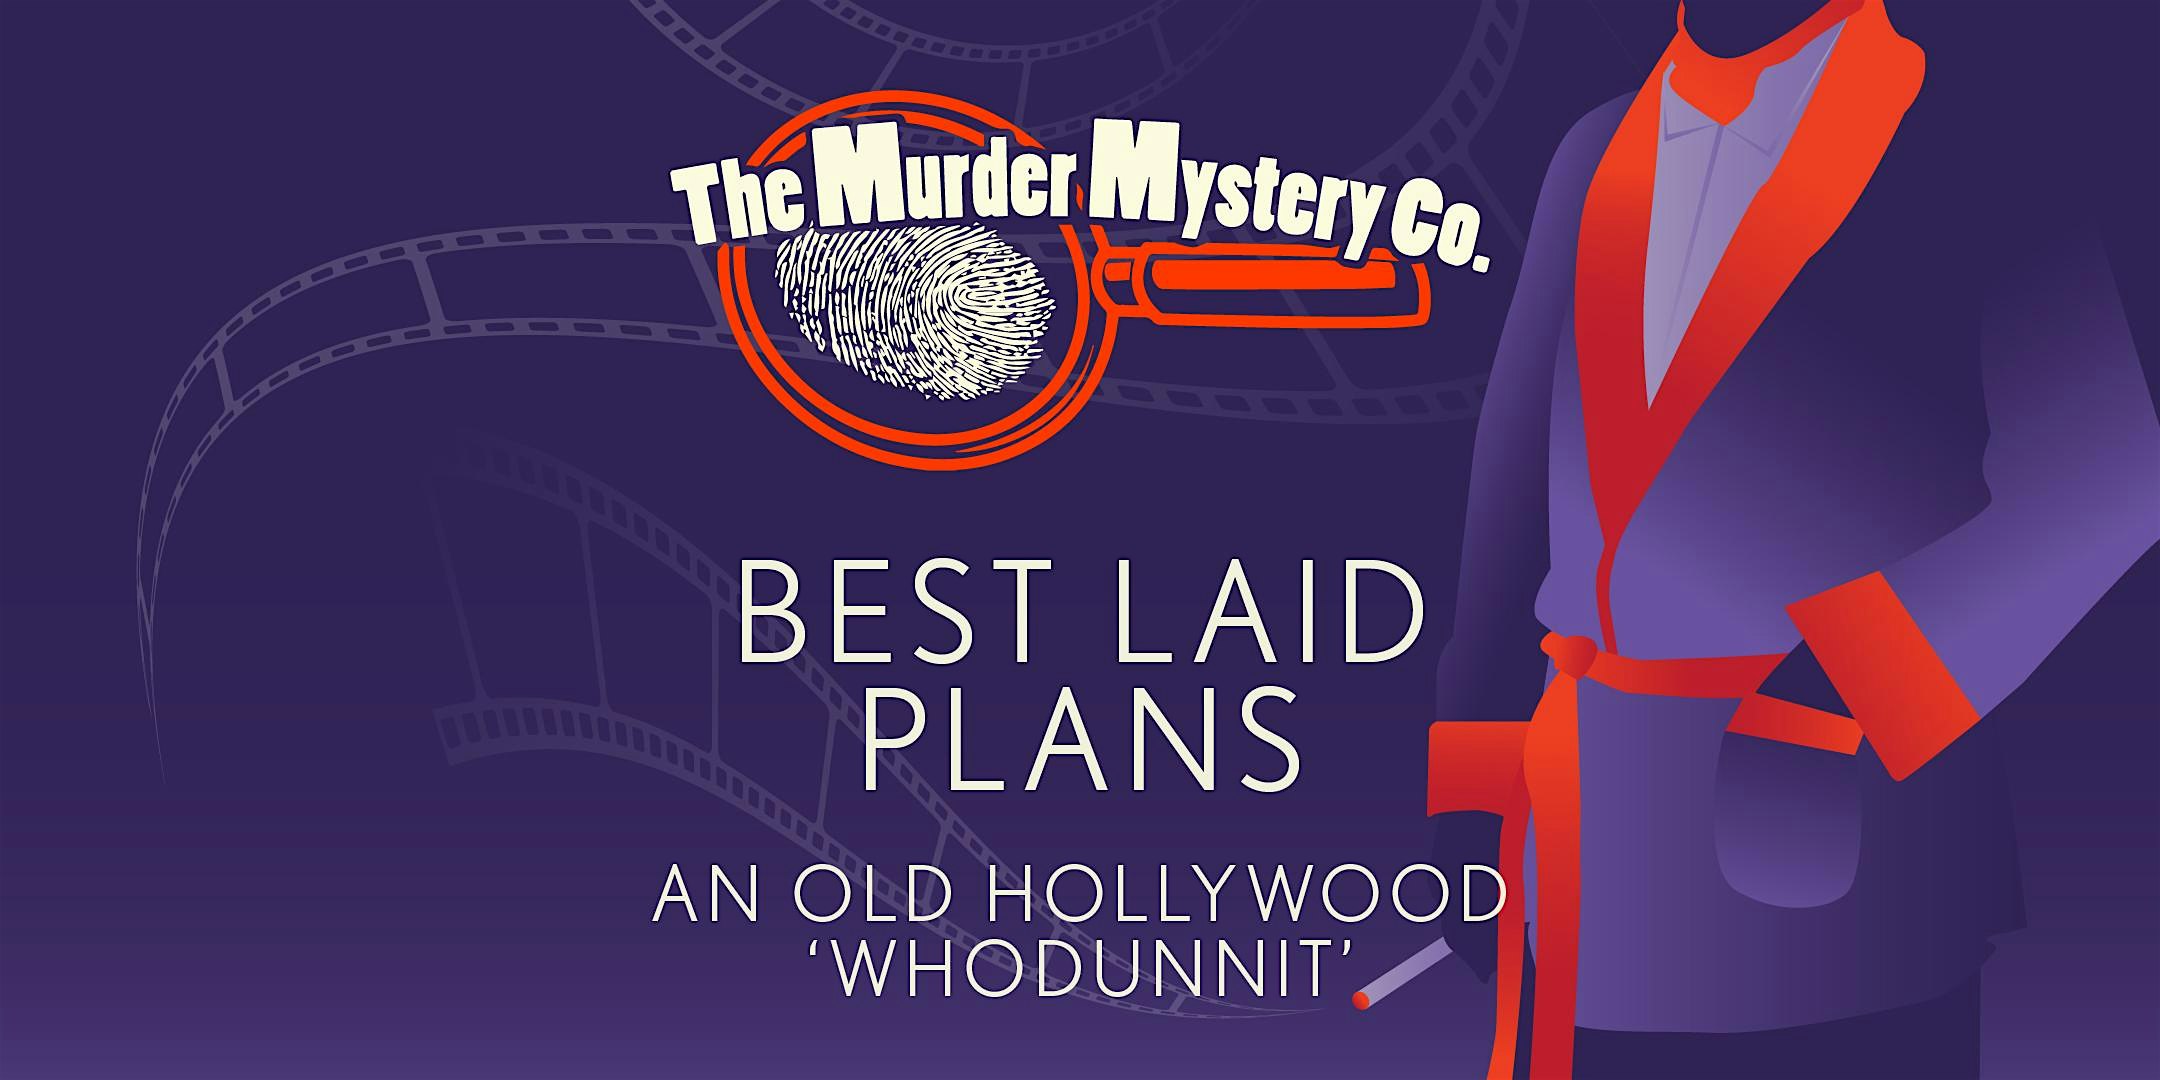 Murder Mystery Dinner Theater Show in Baltimore: Best Laid Plans